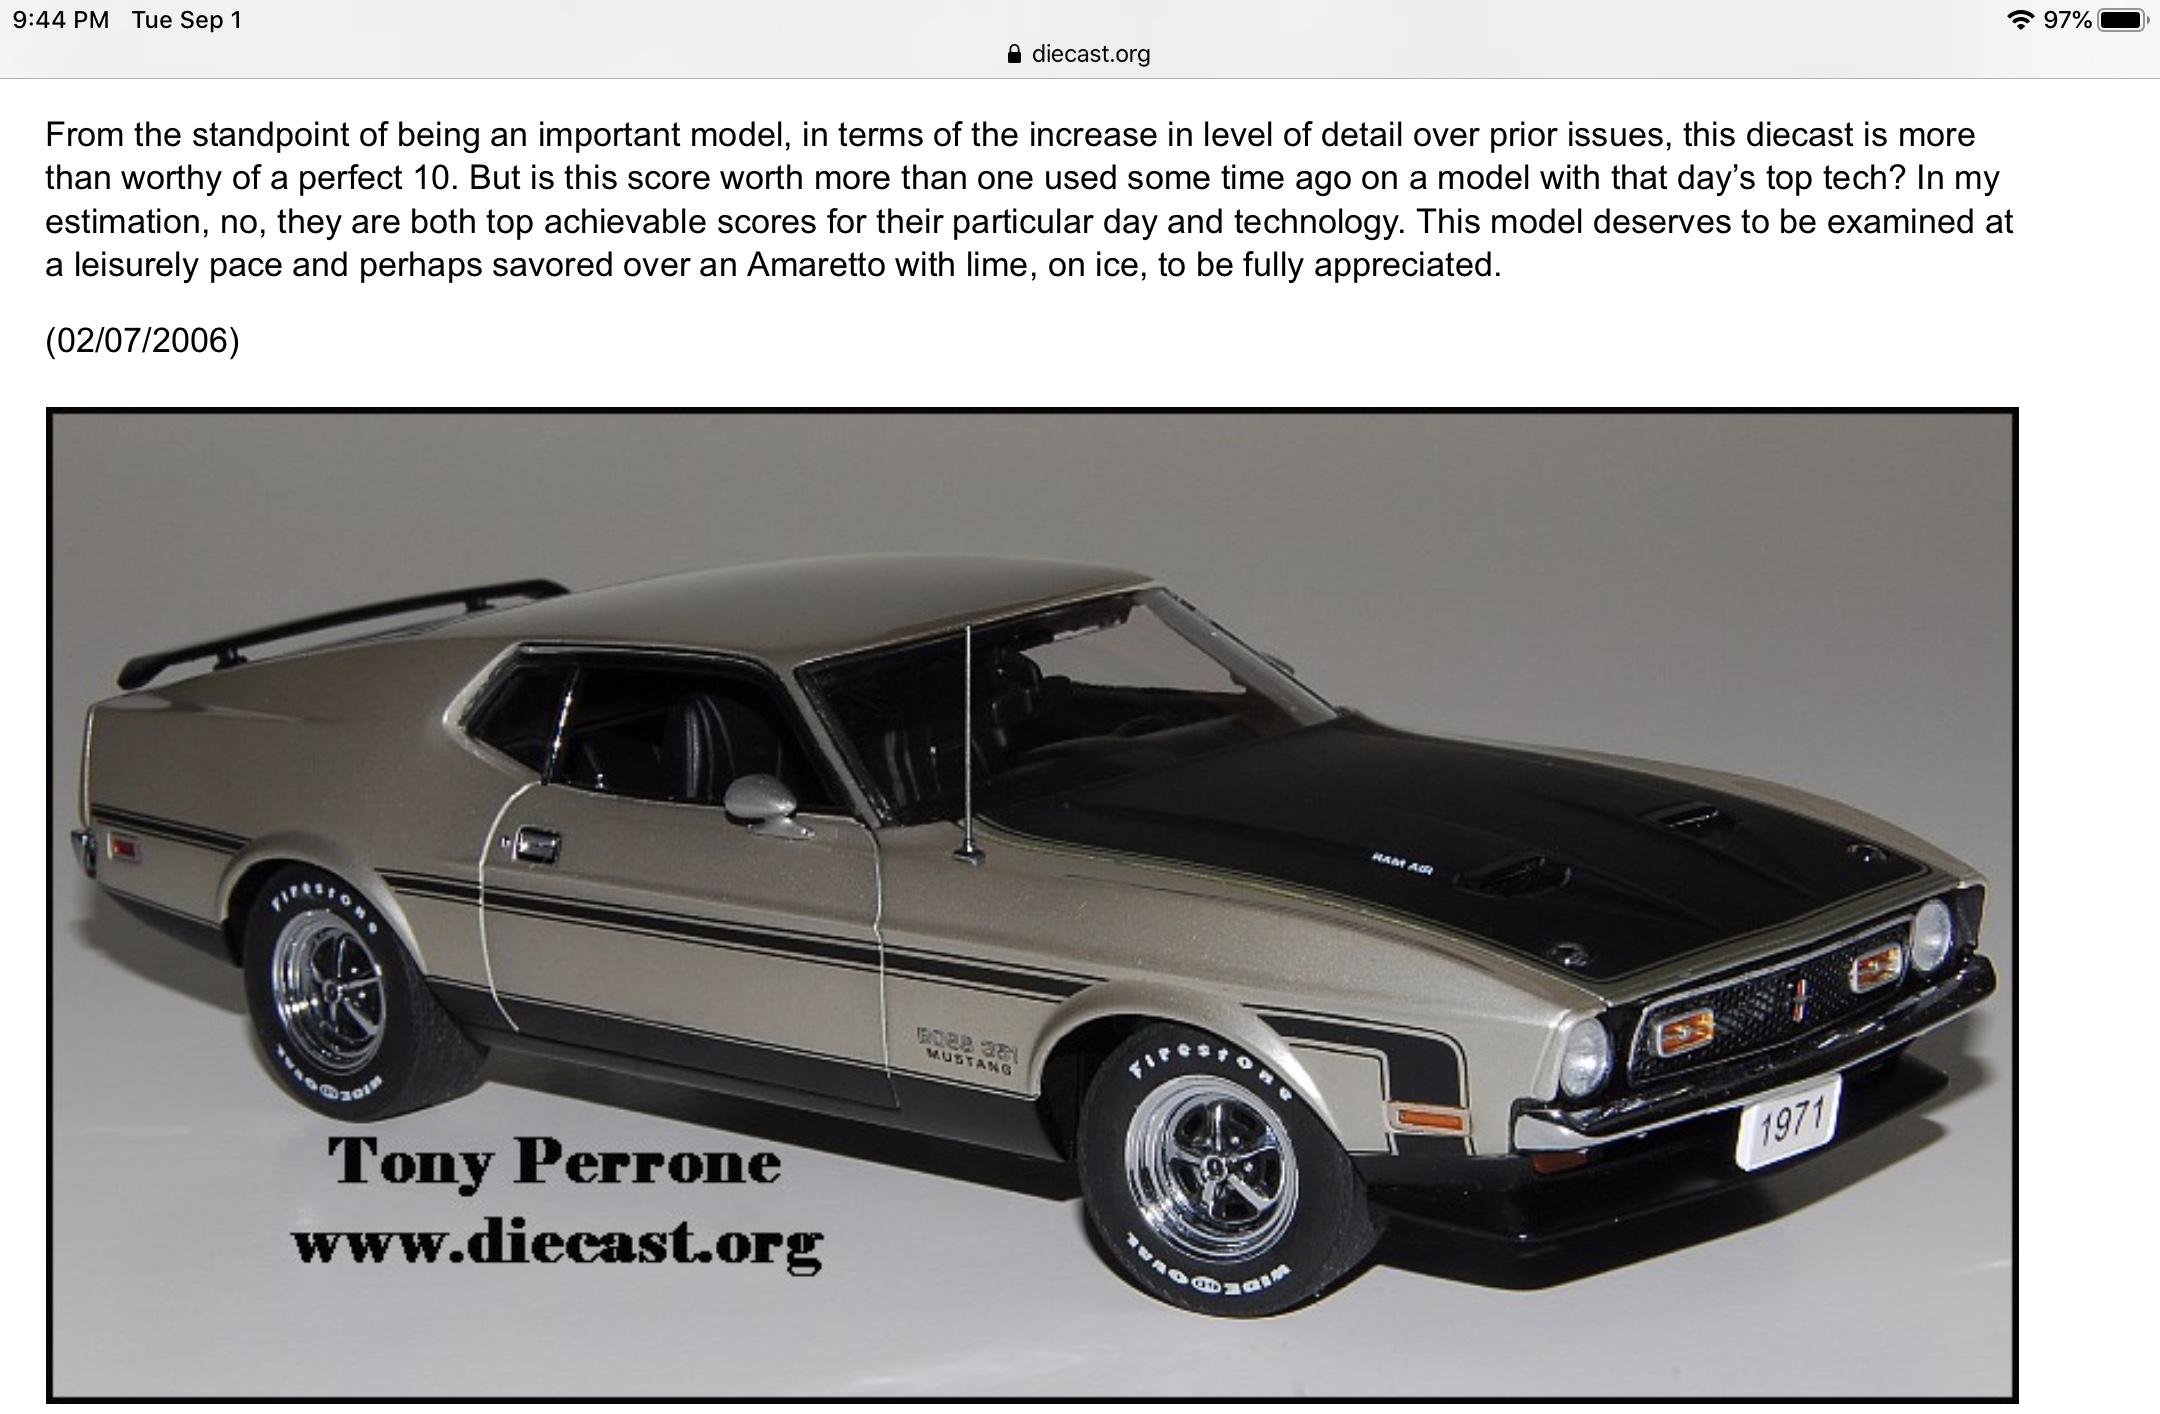 Revell 1971 Boss 351 Mustang Page 4 Car Kit News And Reviews Model